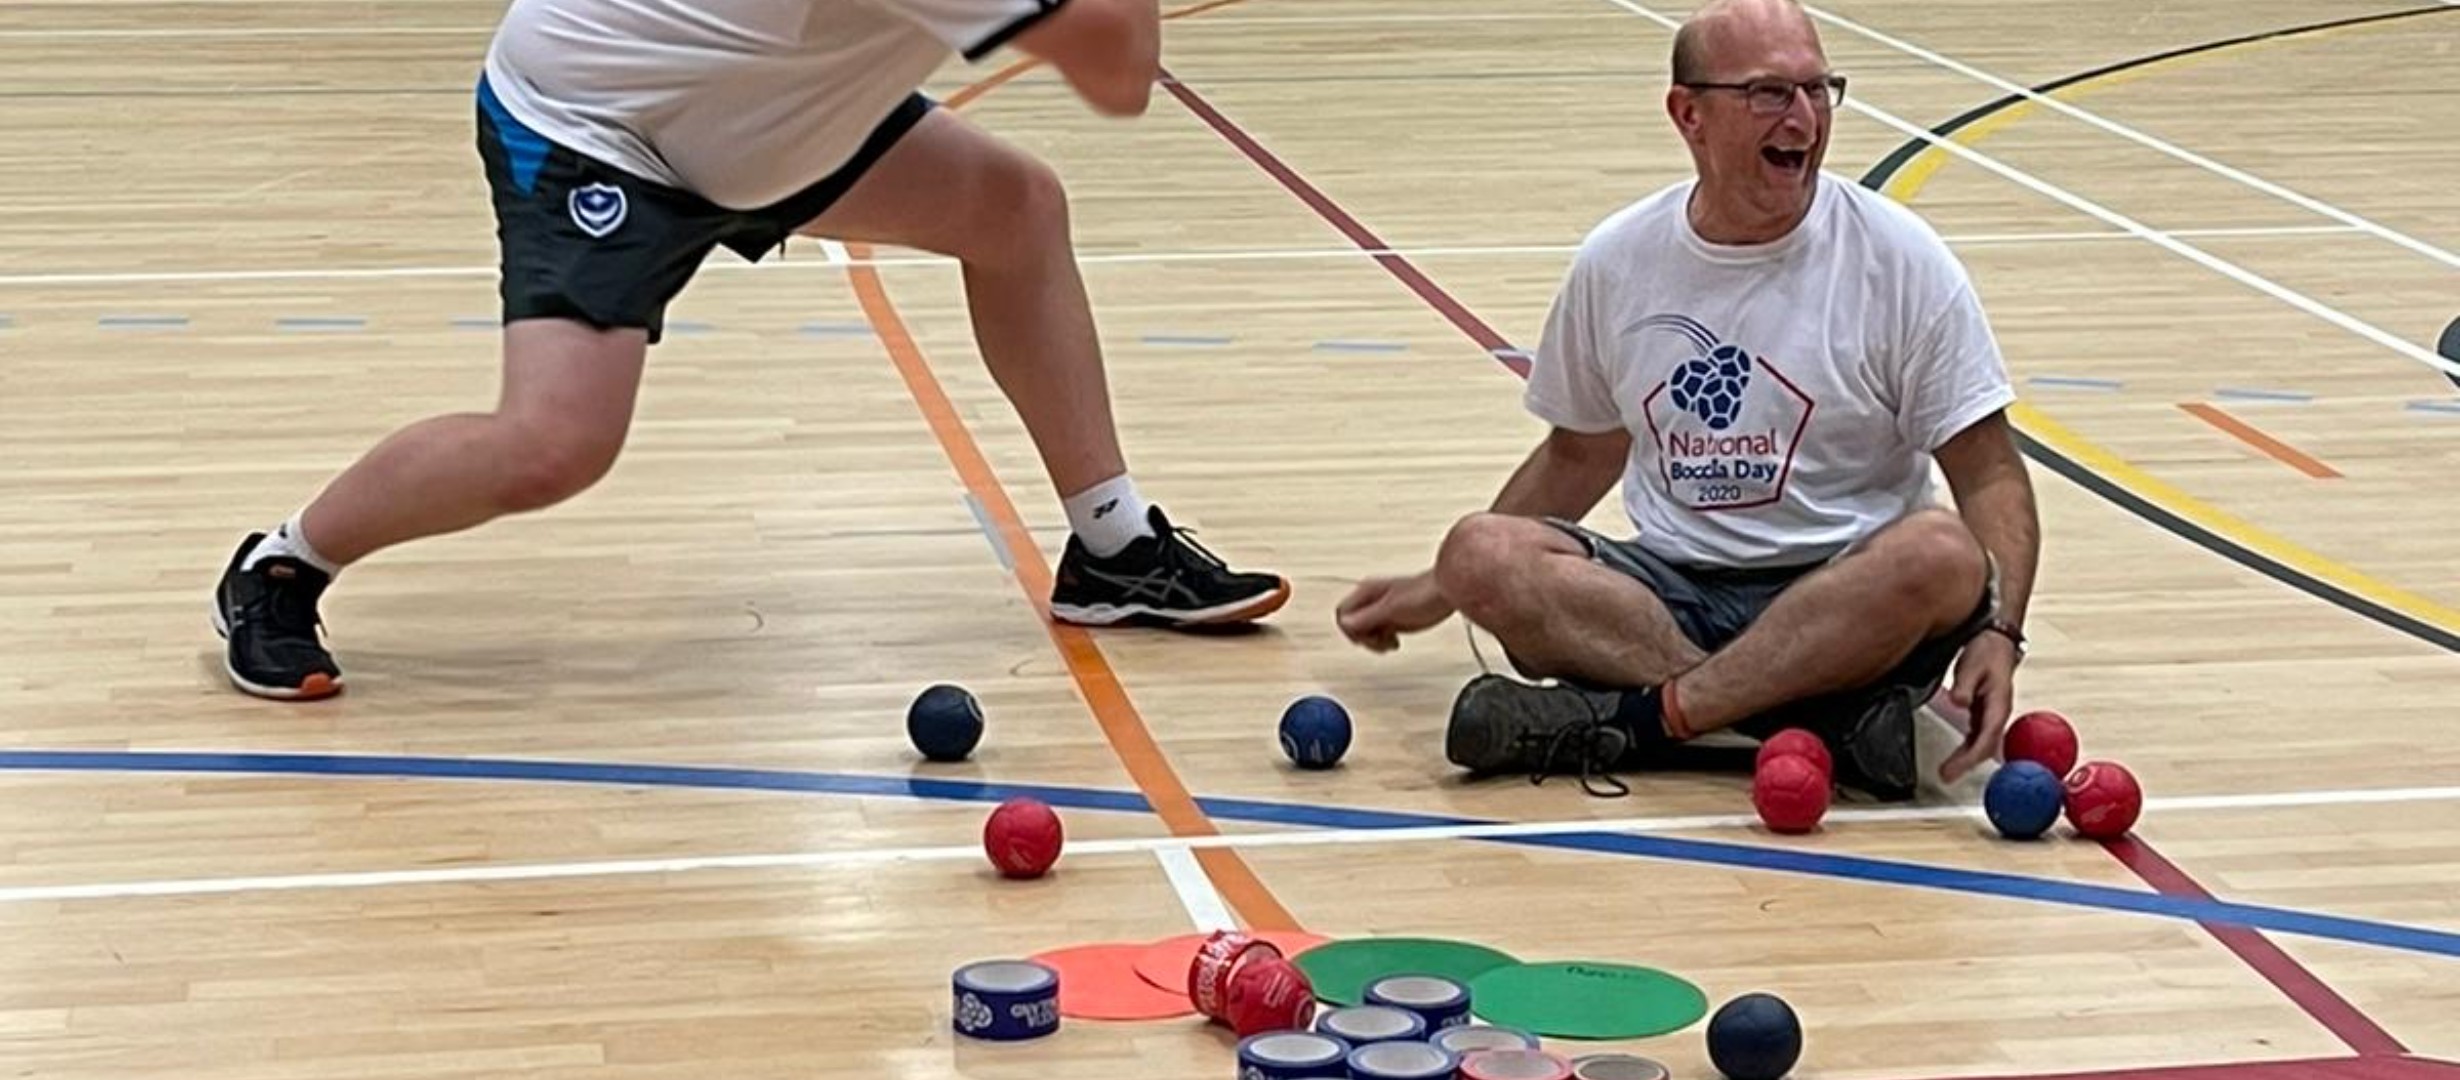 Boccia coach Dave sitting cross legged on the floor surrounded by boccia balls with more balls and equipment in front of him.  The legs of another coach moving toward him are on the left